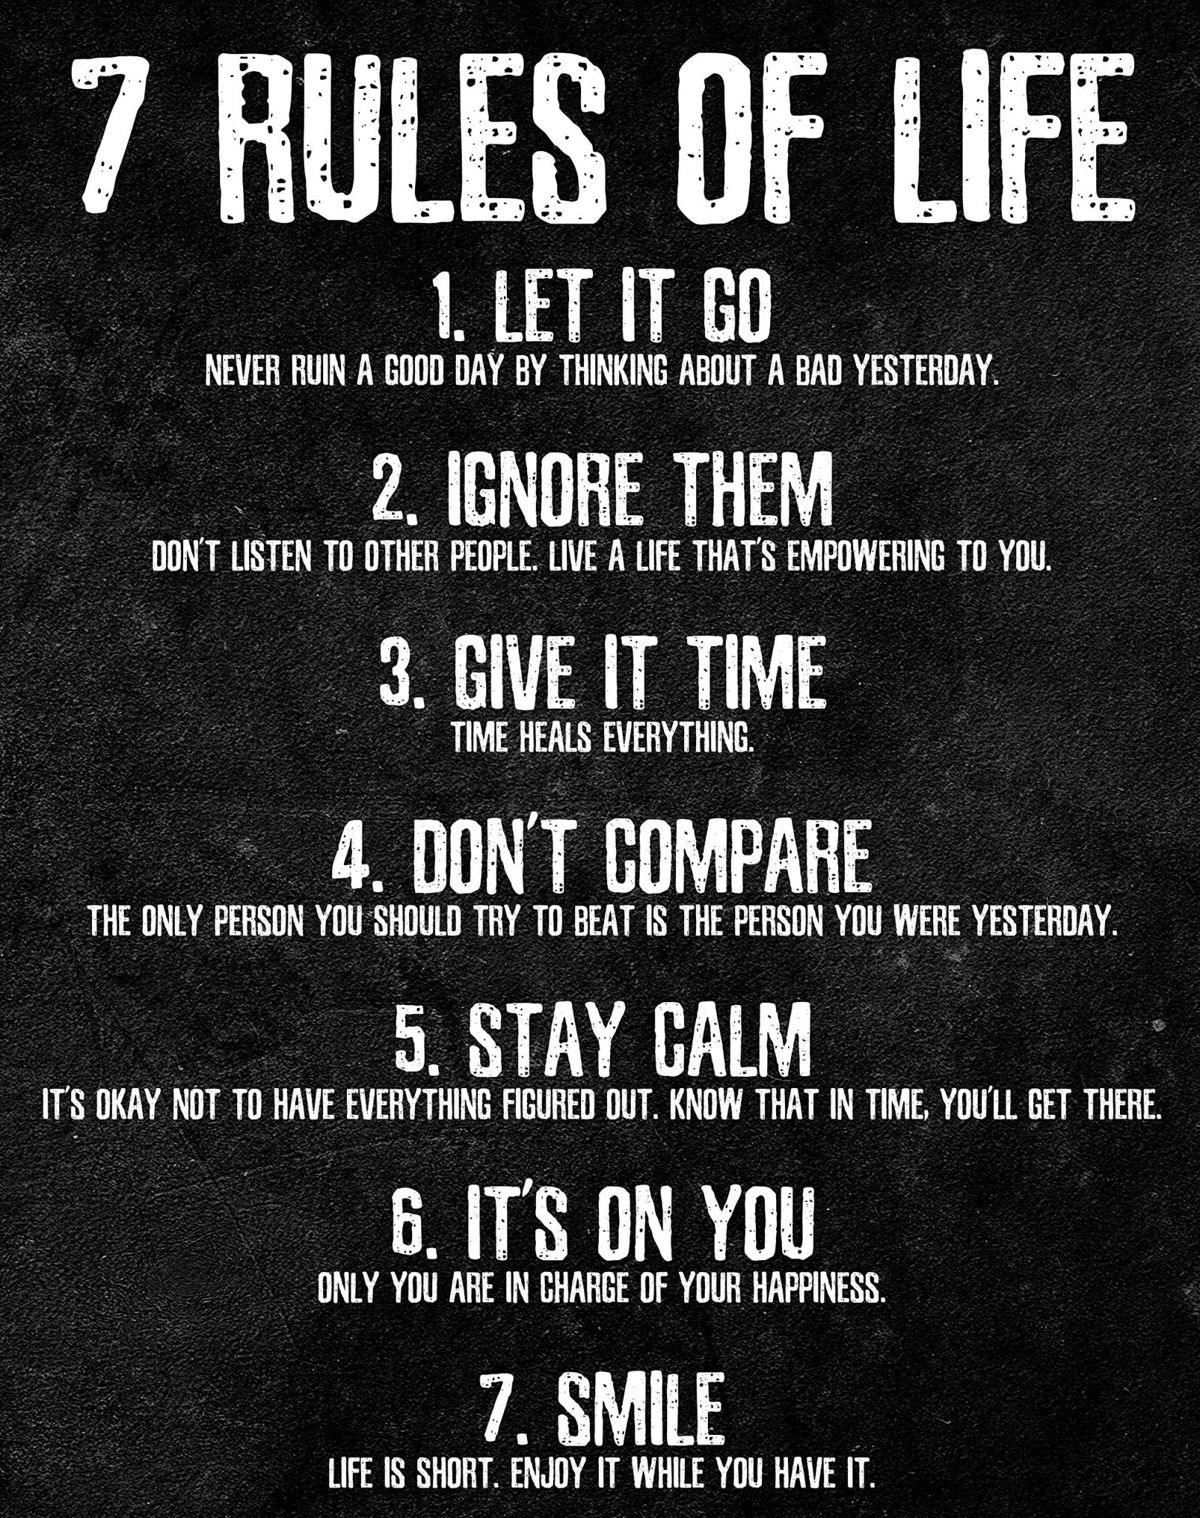 7-rules-of-life-motivational-poster-poster-canvas-wall-art-print